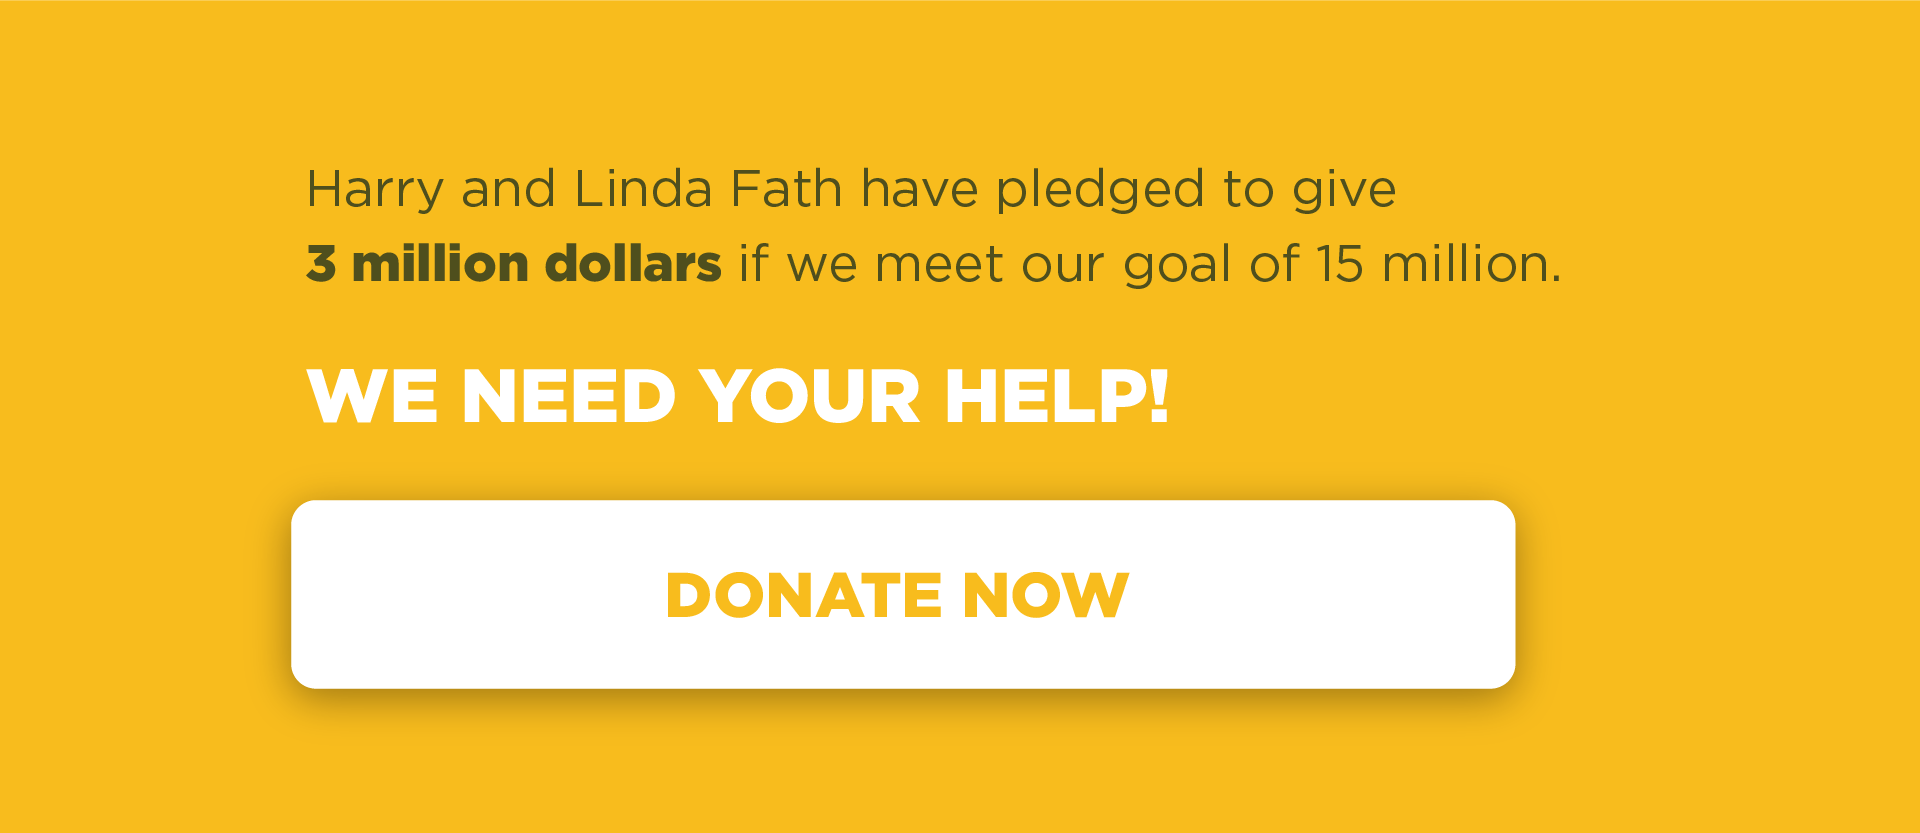 Harry and Linda Fath have pledged to give 3 million dollars if we meet our goal of 15 million. WE NEED YOUR HELP! DONATE NOW